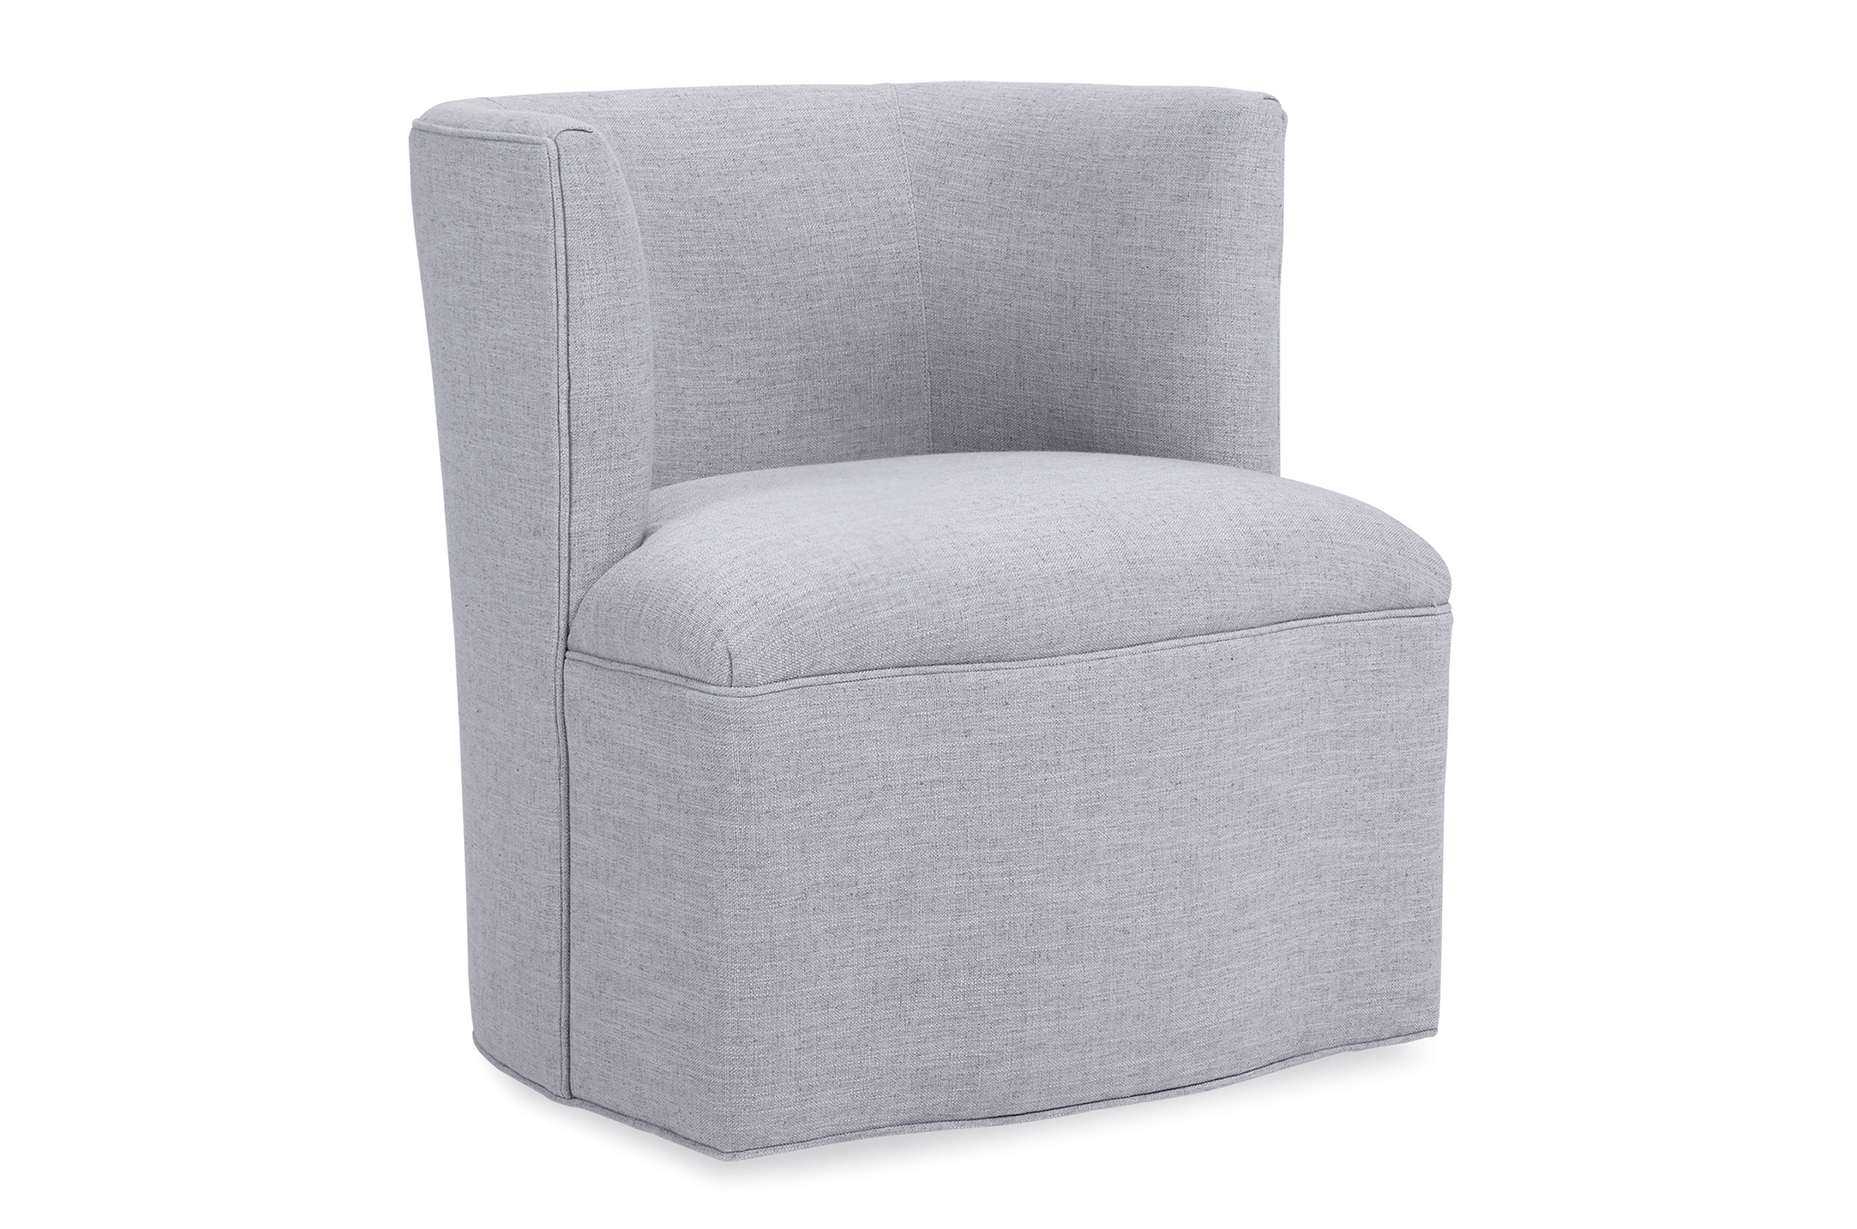 Petite Barrel Swivel Chair : living room : chairs & chaises